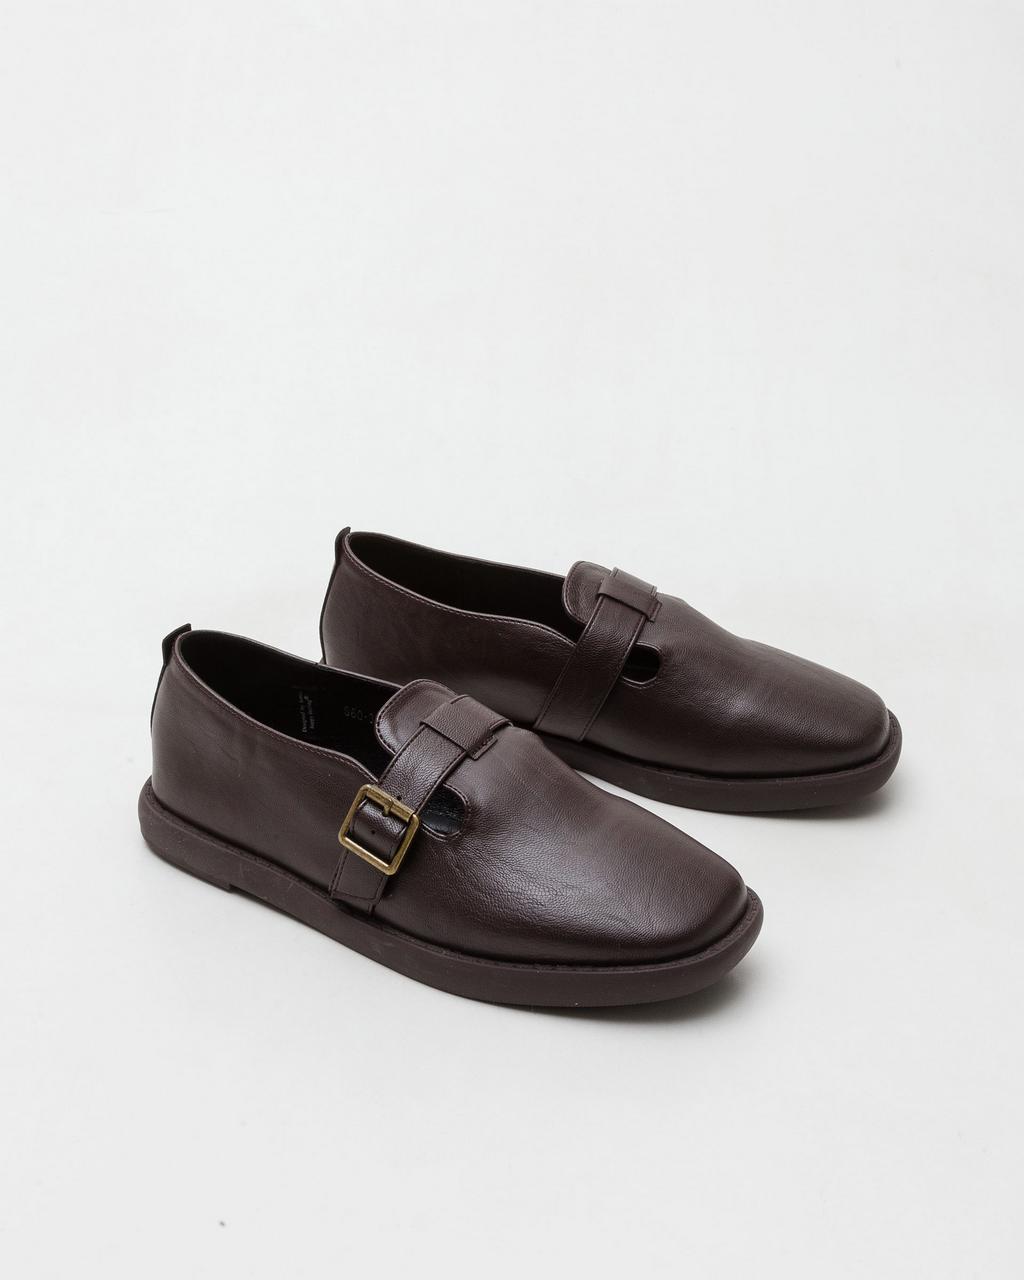 Tagtraume Cresent-03 - Brown(브라운)